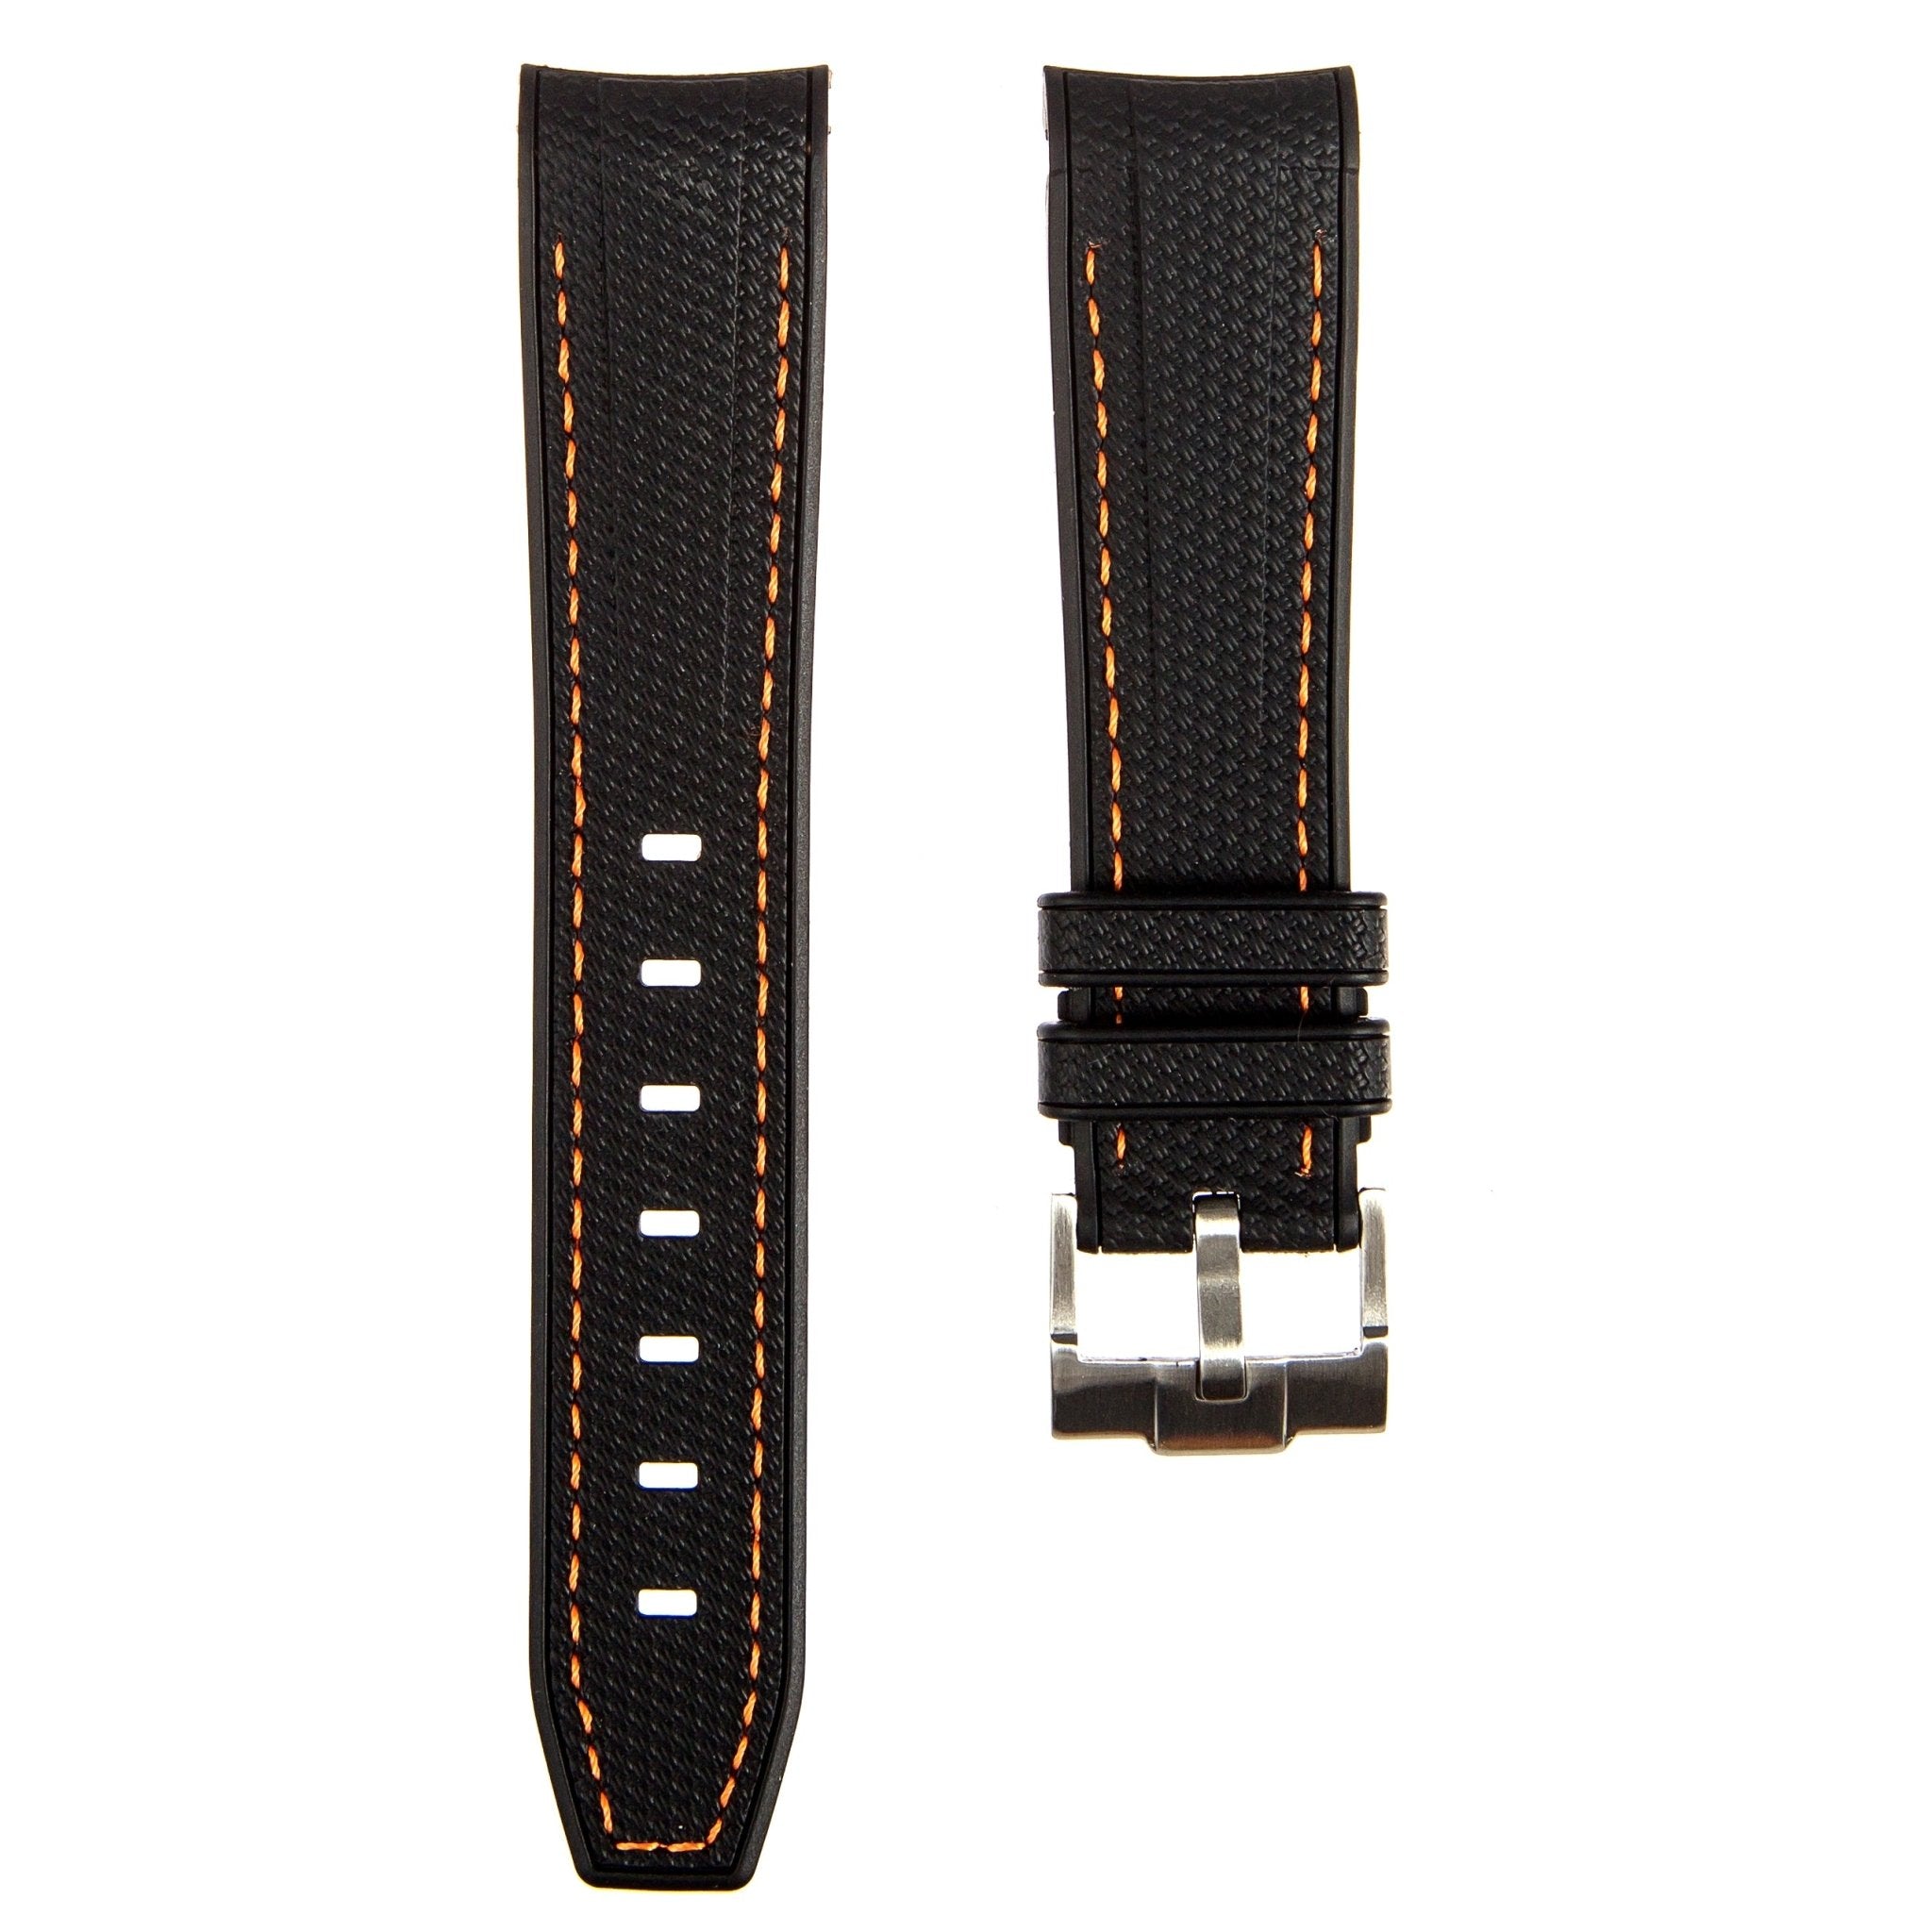 Textured Curved End Premium Silicone Strap - Compatible with Omega Moonwatch - Black with Orange Stitch (2405) -StrapSeeker